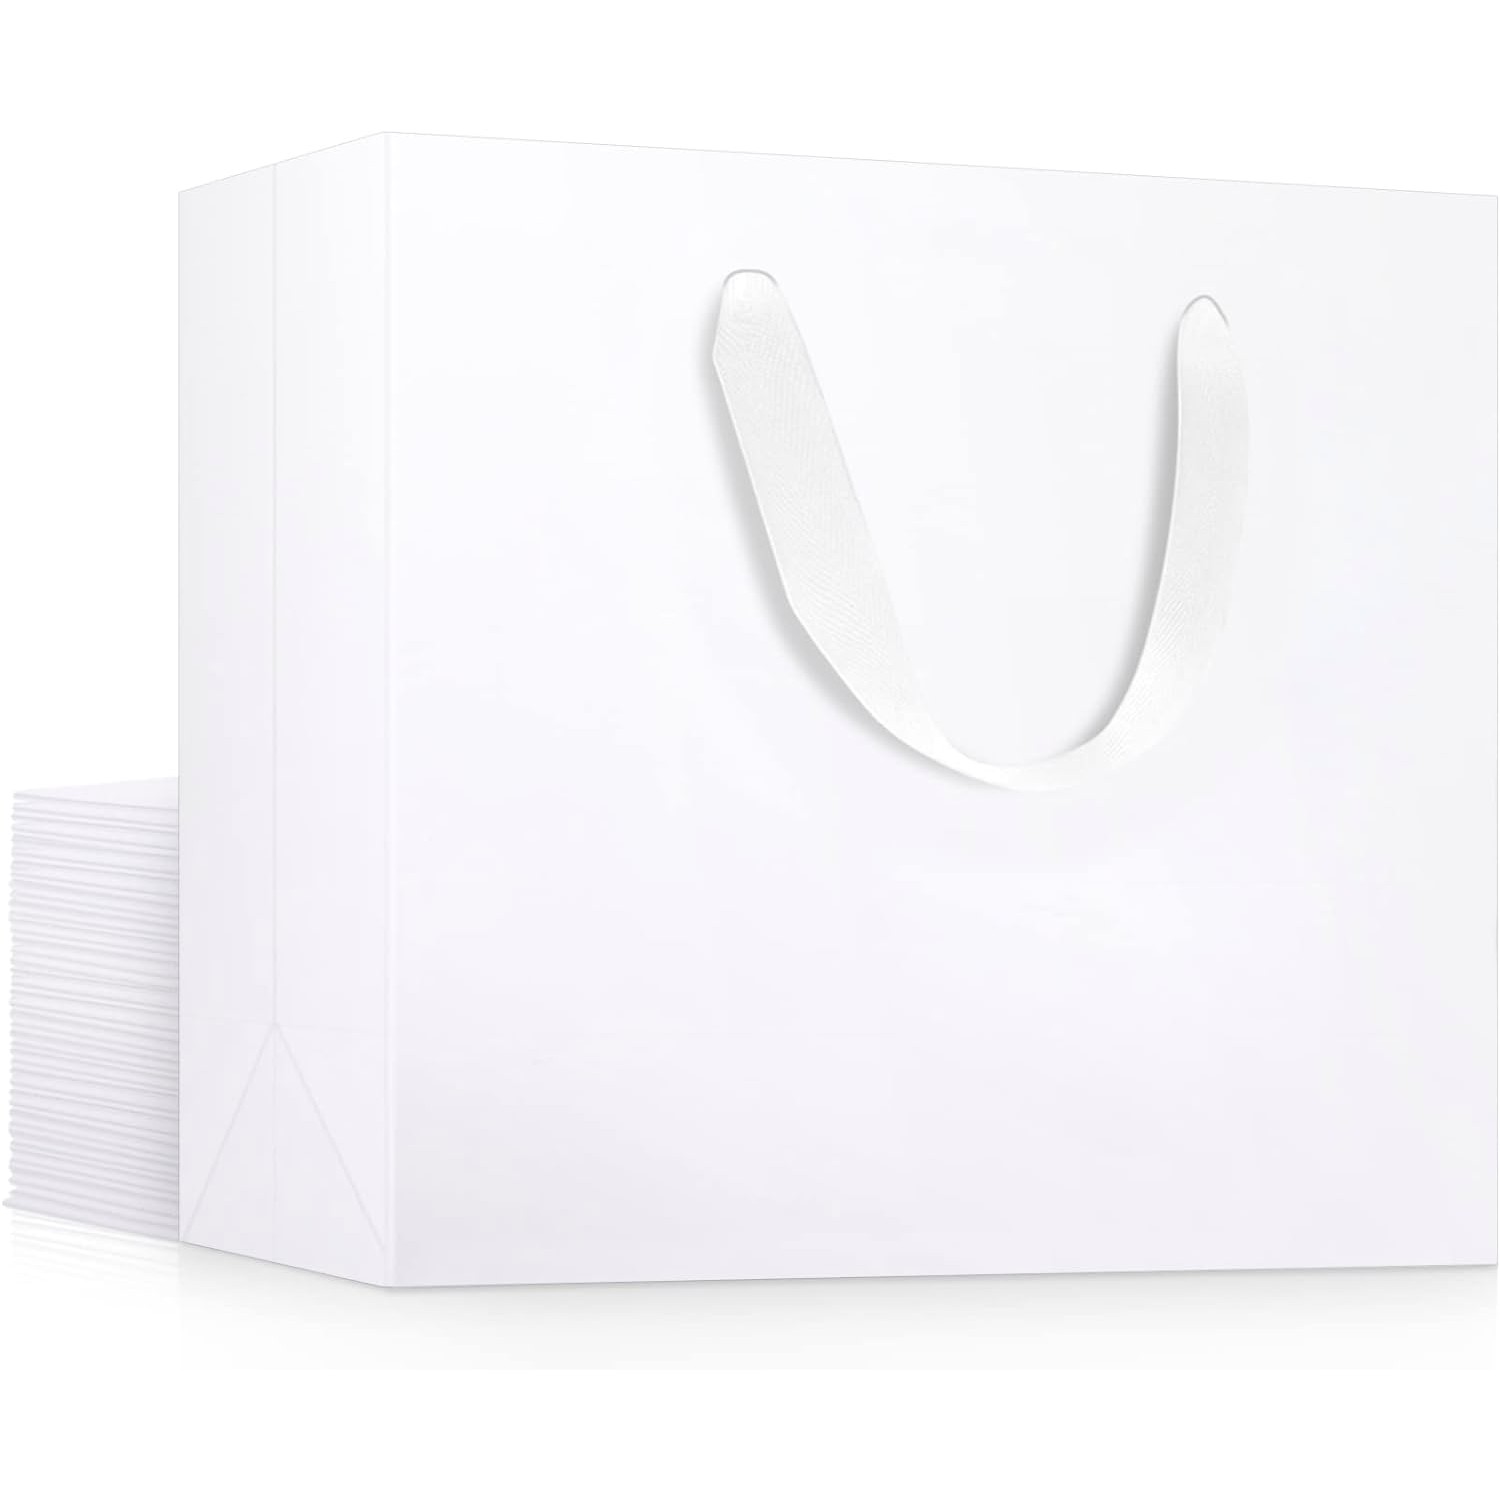 Small White Paper Bags 3 x 2 x 6 party favors, Paper Lunch Bags, Grocery  Bag, wedding favor bags, kraft bags, paper bags 100 per pack